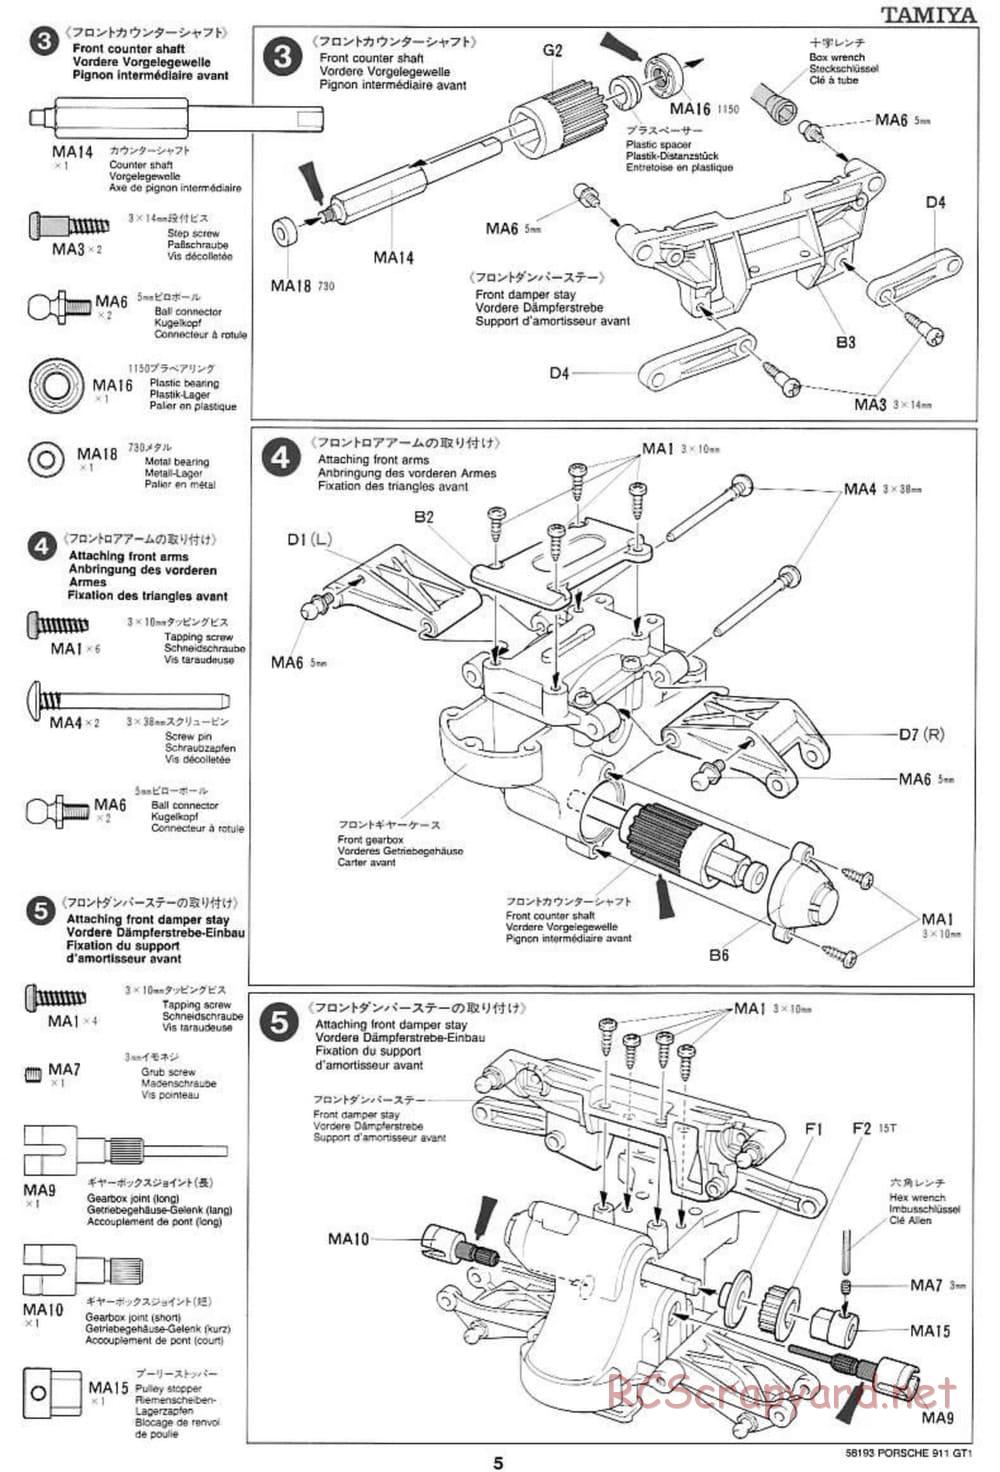 Tamiya - Porsche 911 GT1 - TA-03RS Chassis - Manual - Page 5